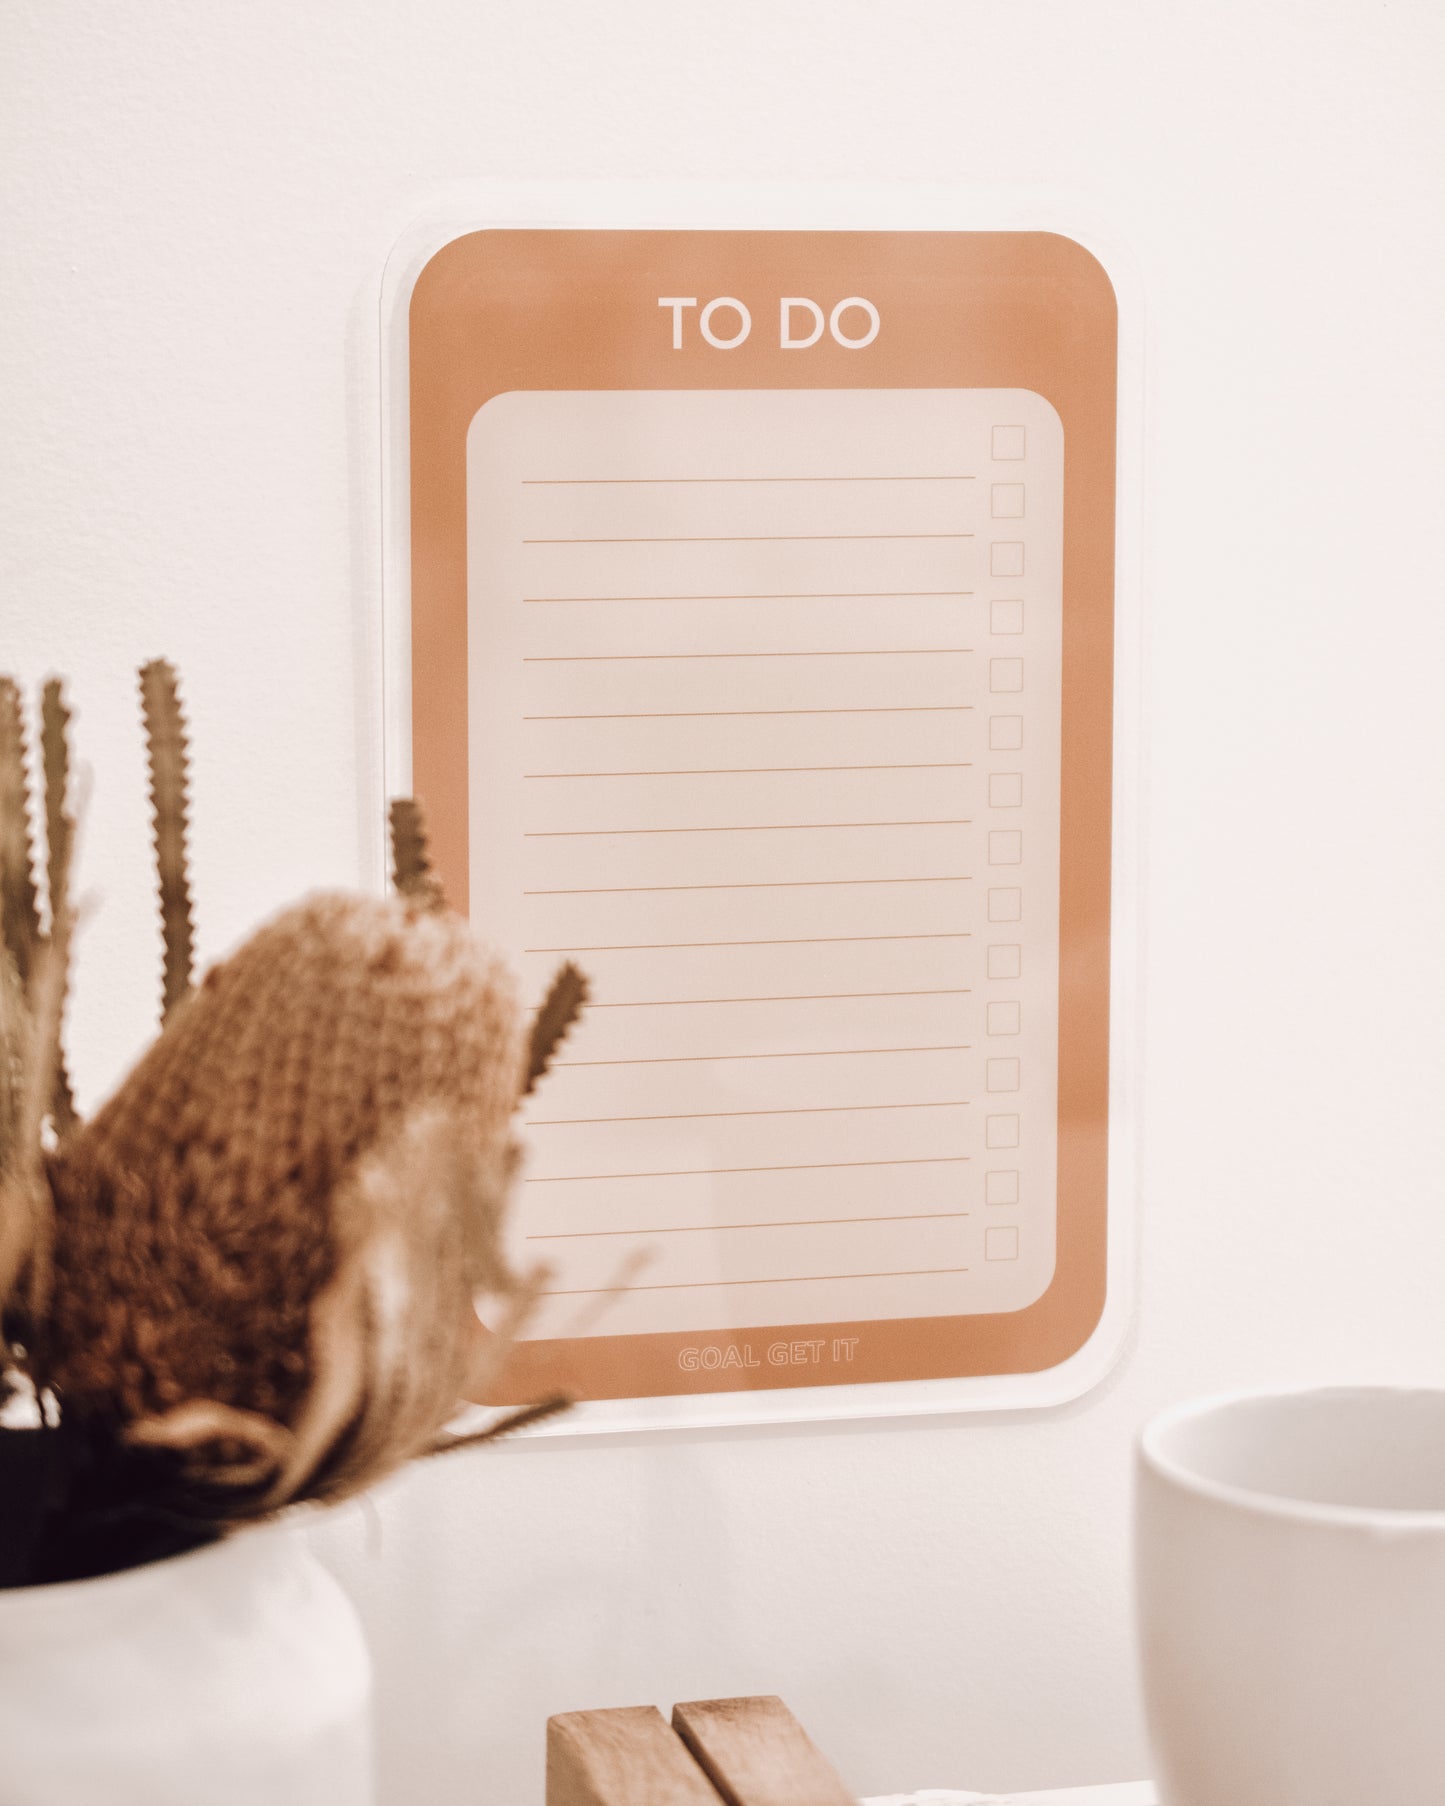 Acrylic Planner - To Do List